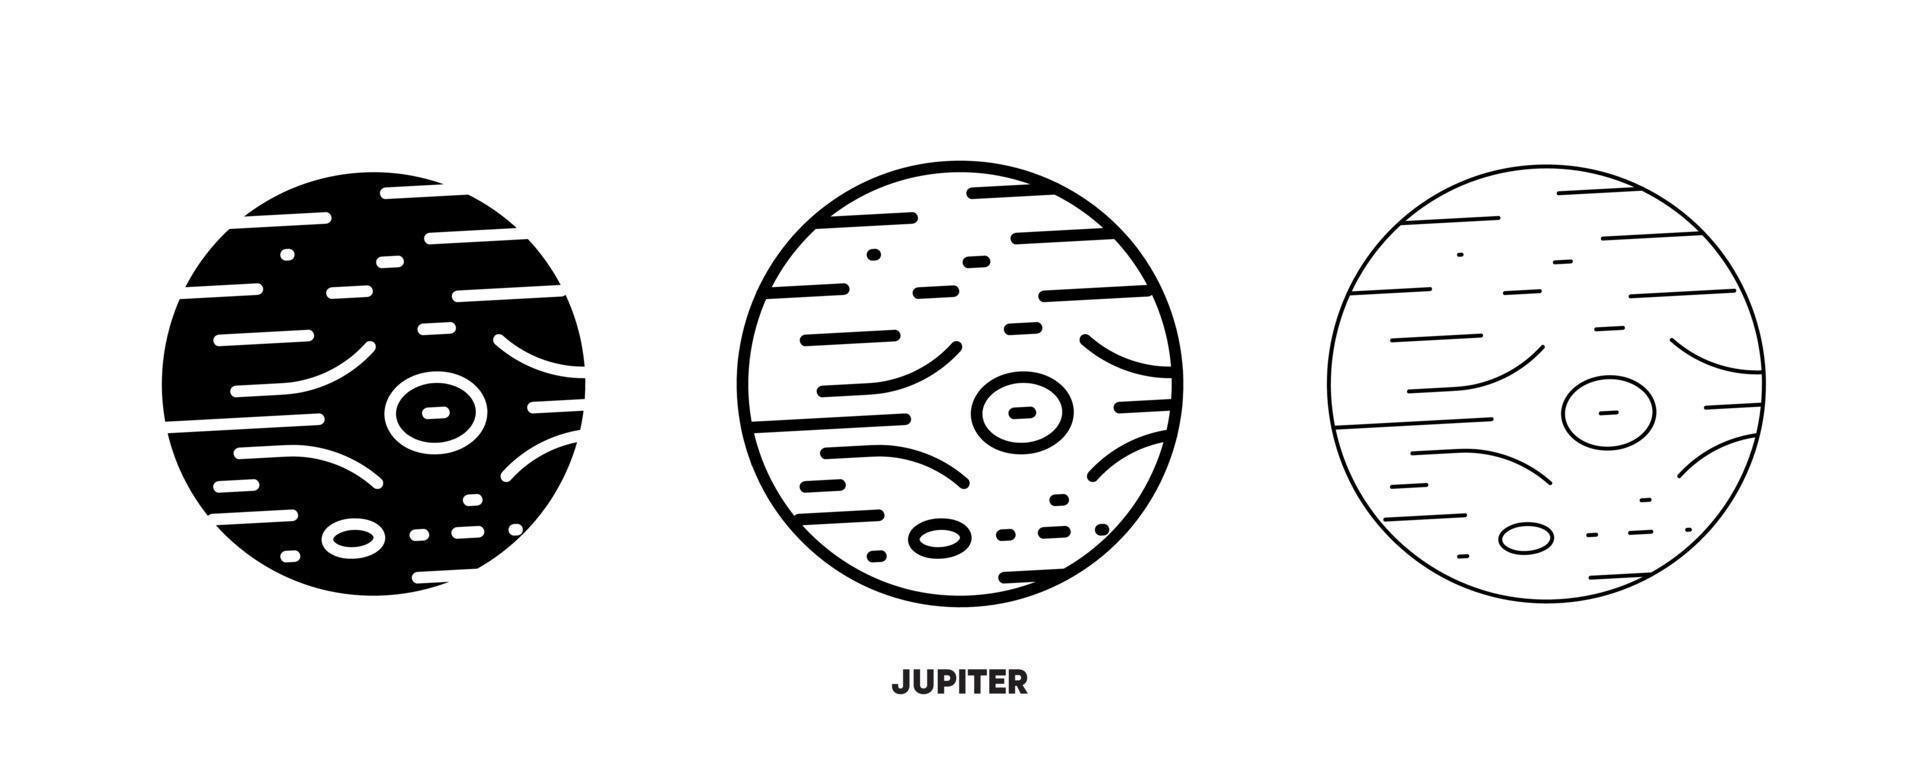 Jupiter planet icon vector. Simple planet Jupiter sign in modern design style and logo art for website and mobile app. Editable drawing and silhouette in one. vector